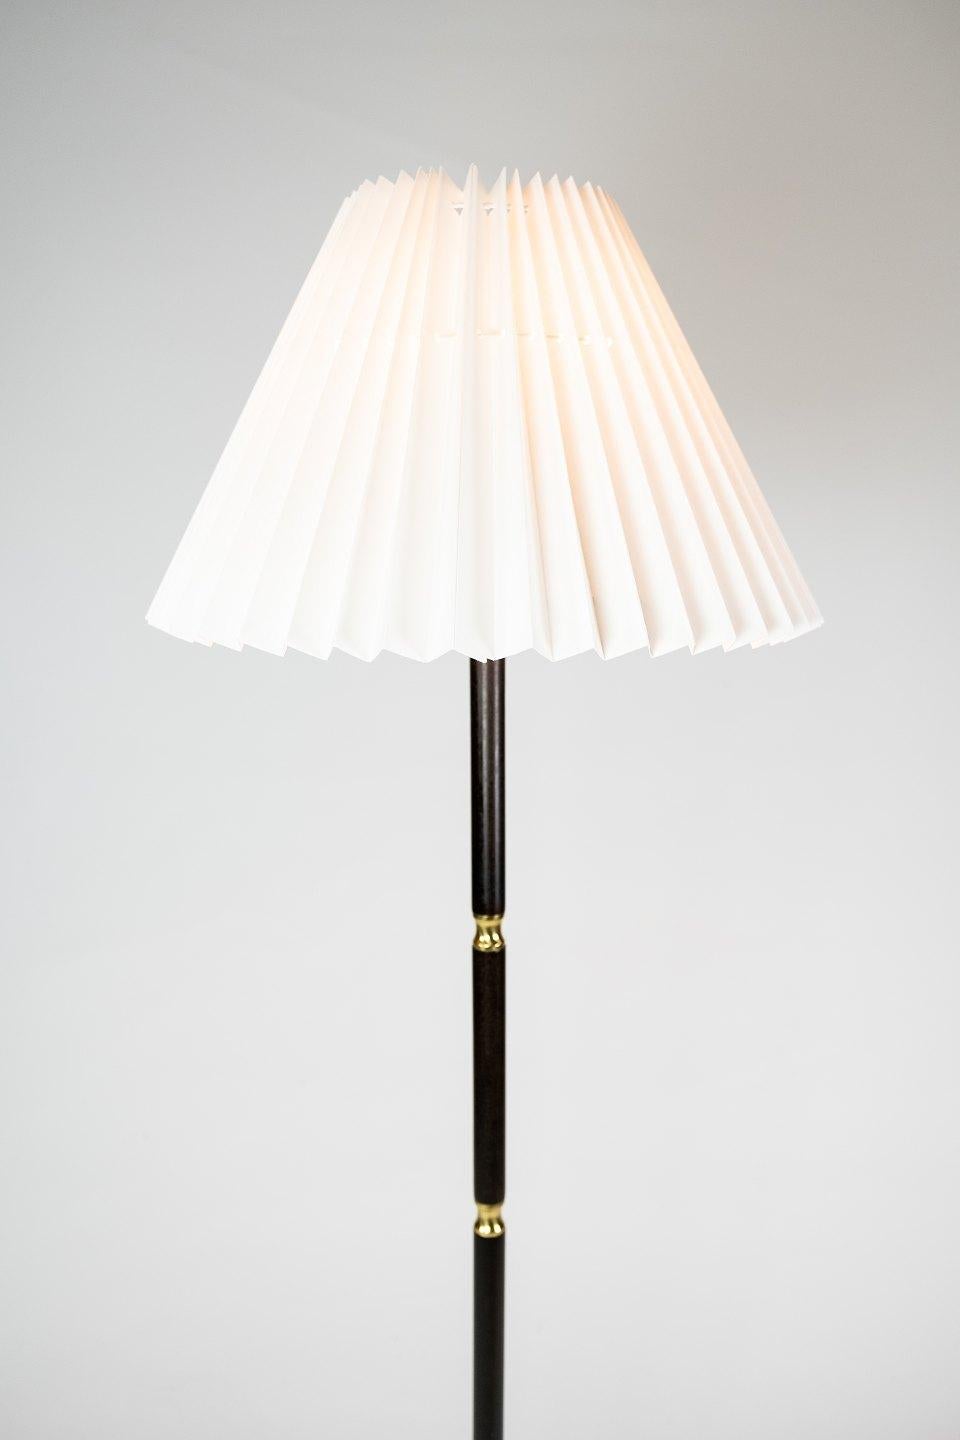 Mid-20th Century Floor Lamp in Rosewood and Brass of Danish Design from the 1960s